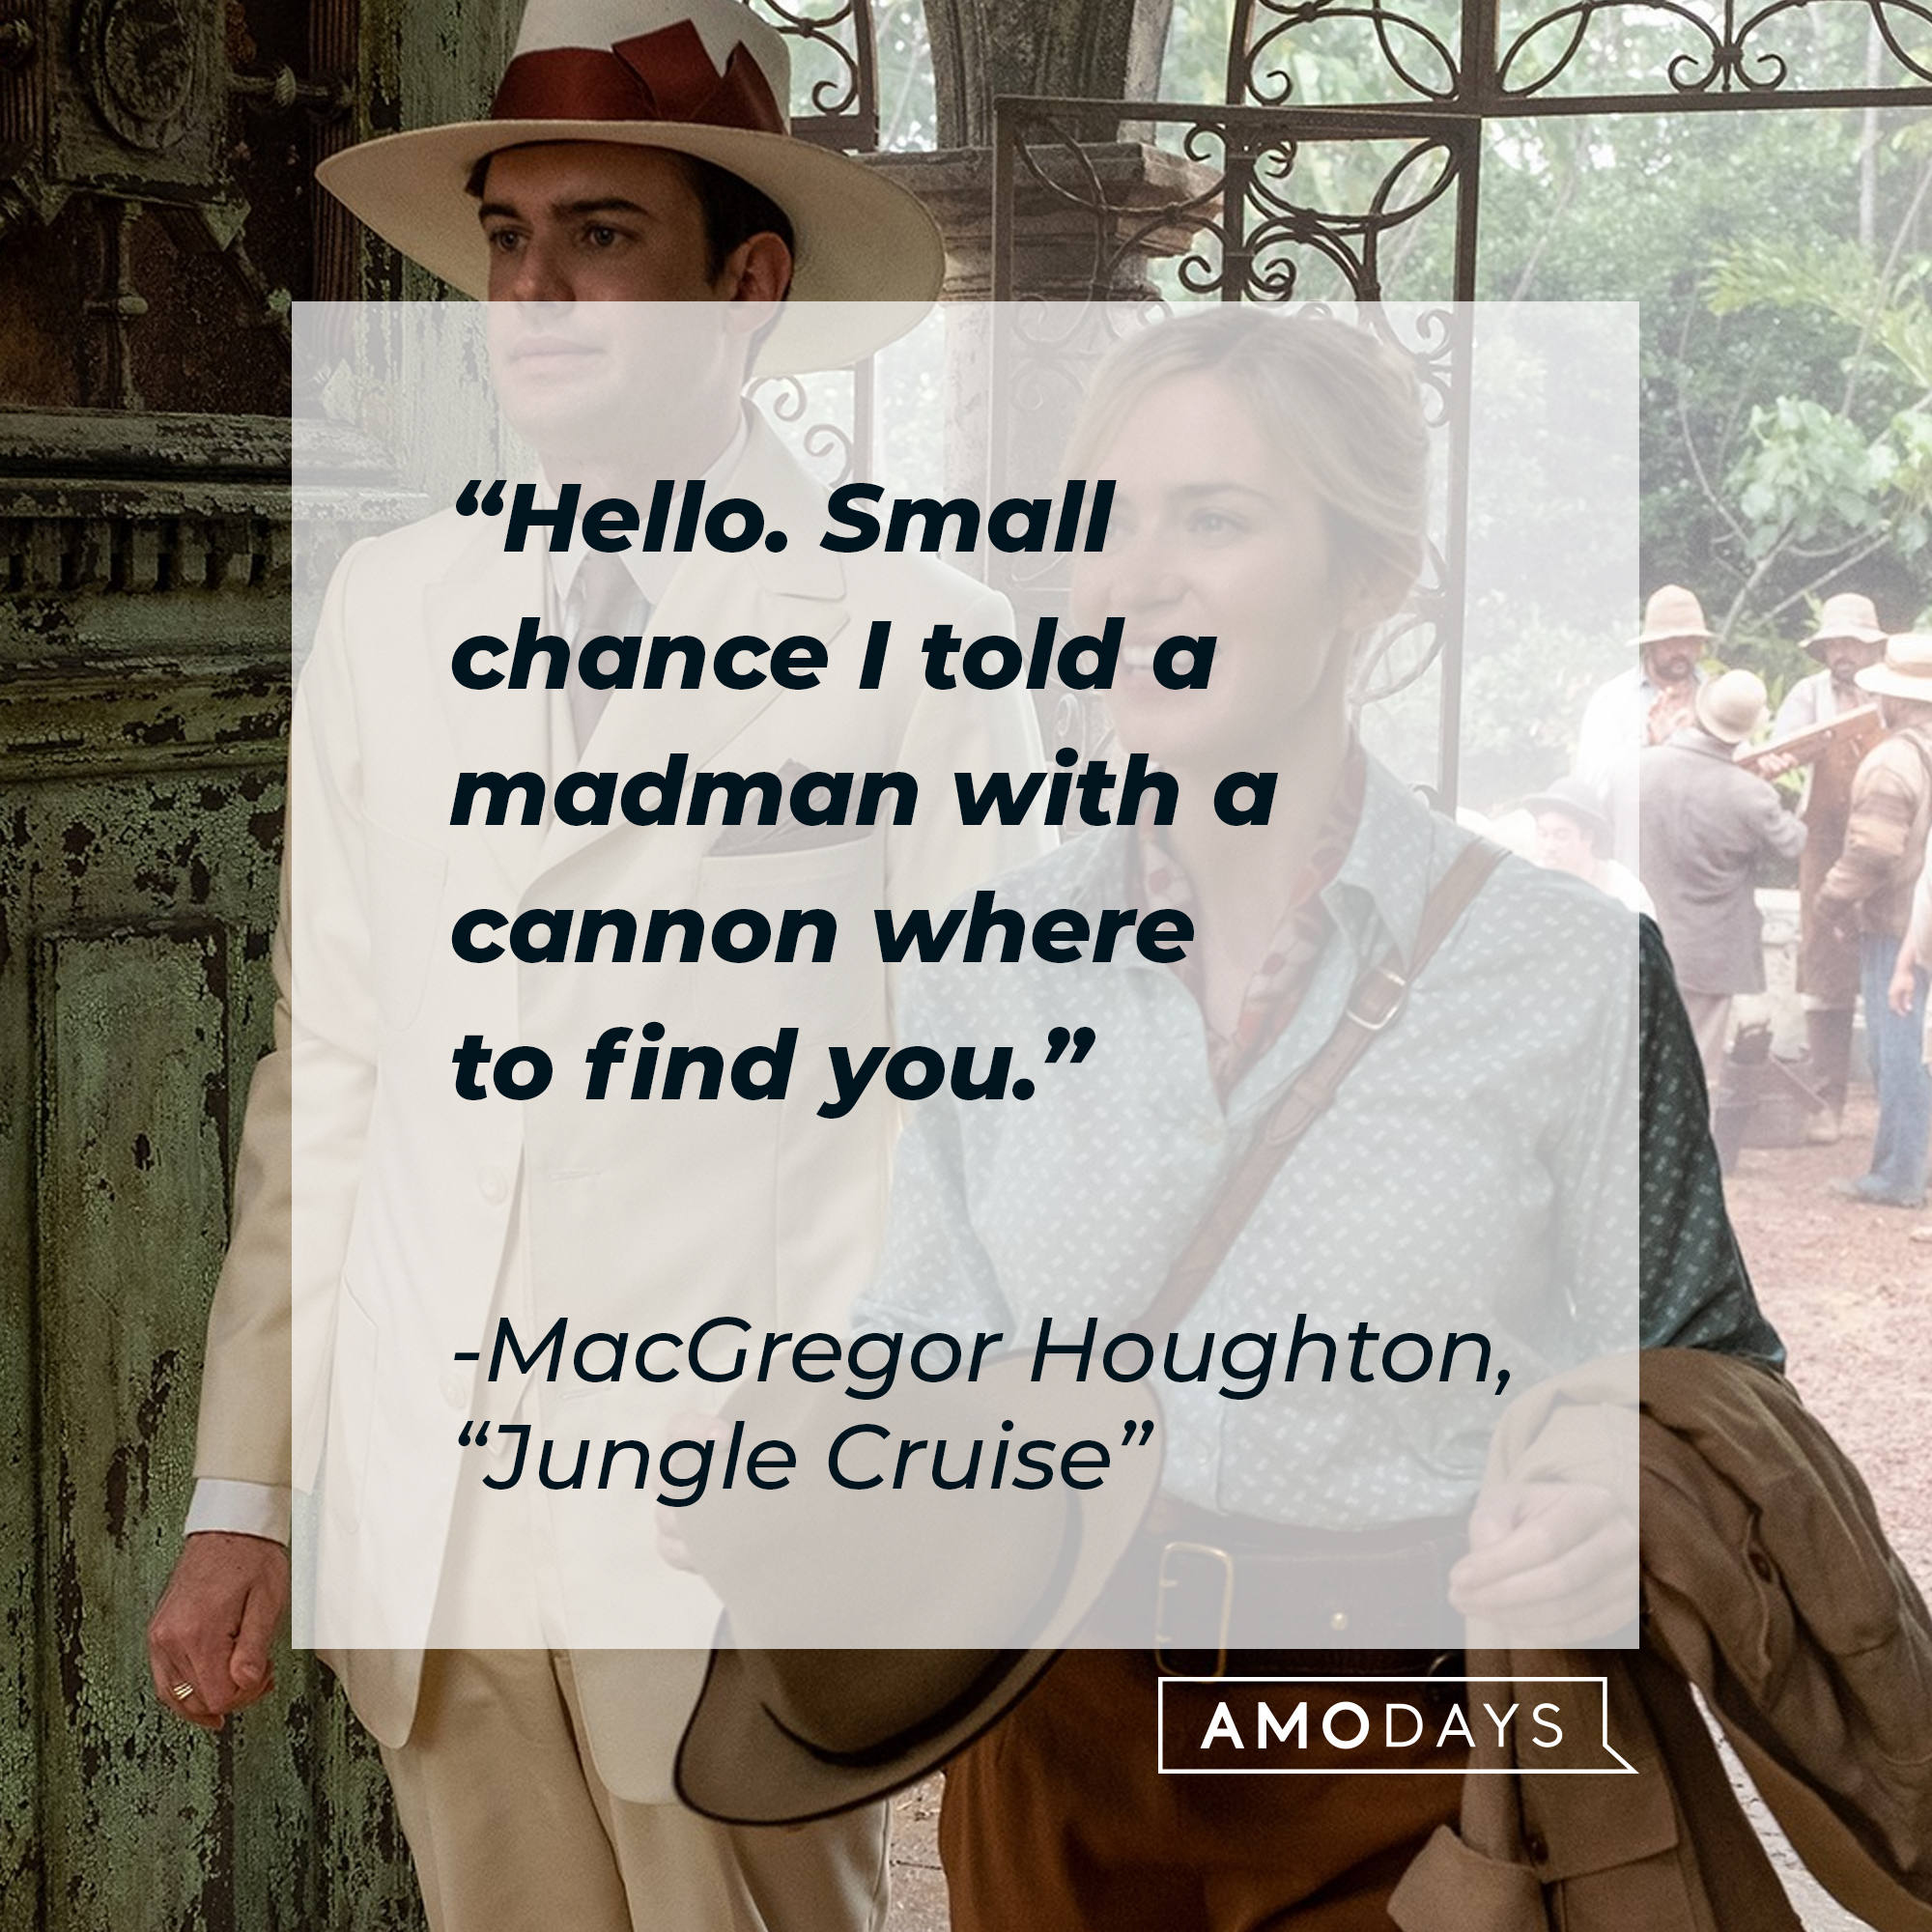 MacGregor Houghton’s quote: "Hello. Small chance I told a madman with a cannon where to find you." | Image: facebook.com/JungleCruise